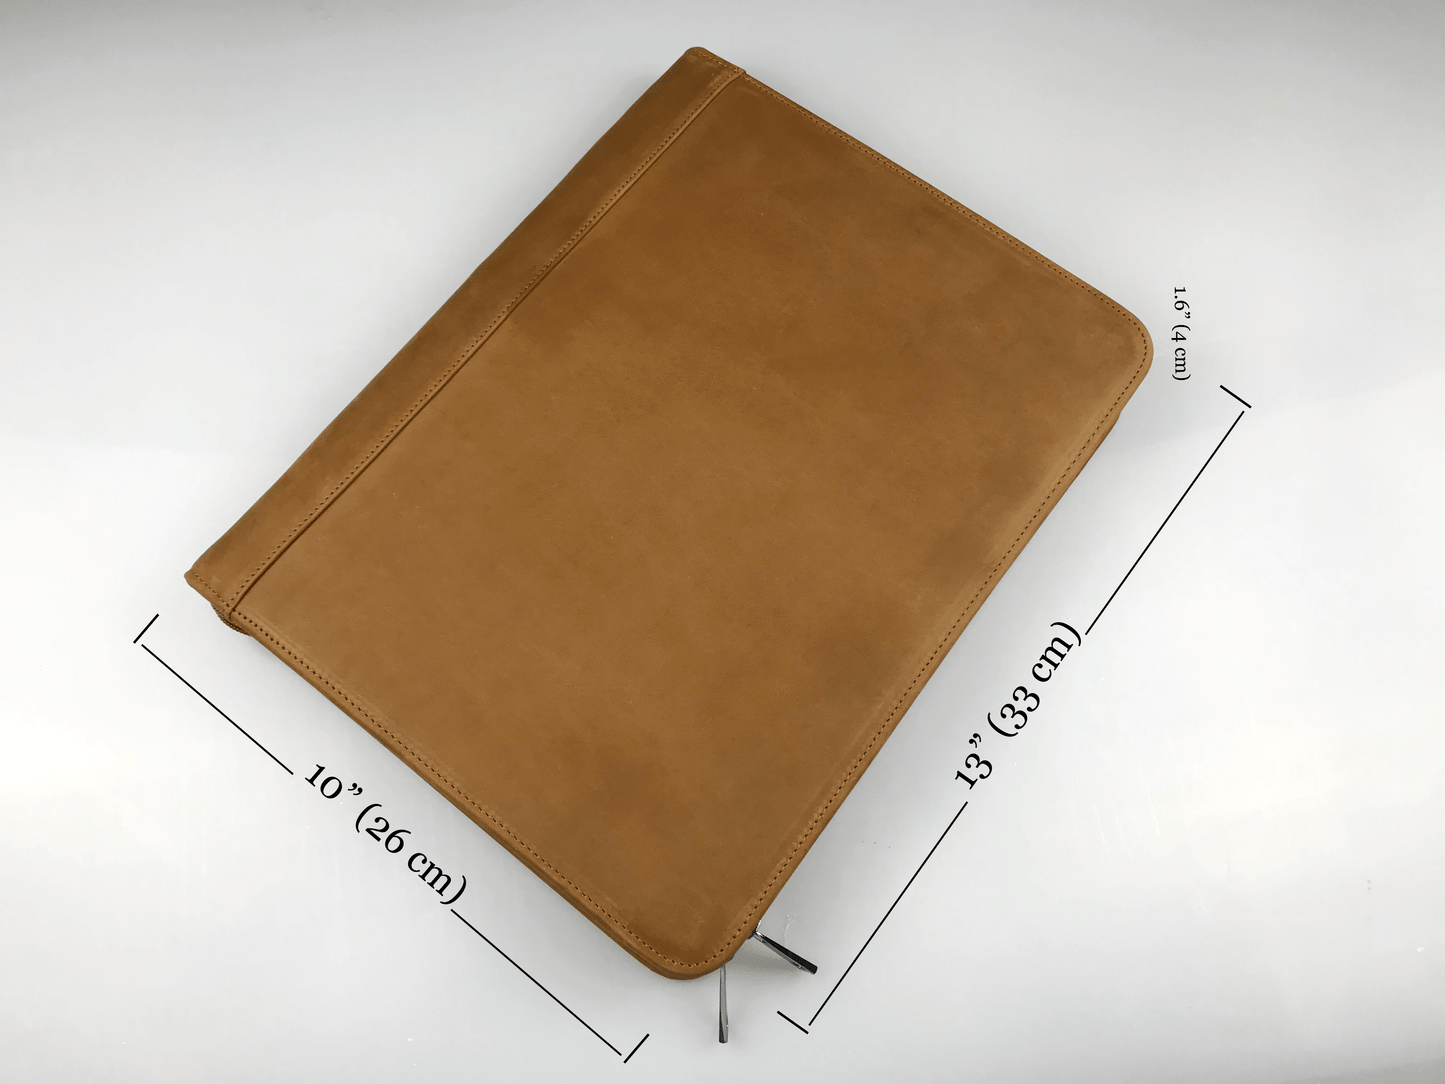 Genuine Leather Portfolio, Zipper Padfolio for Legal Paper/ A4 Letter Size Notepad/ iPad Pro 12.9", Gift for Him/ Her